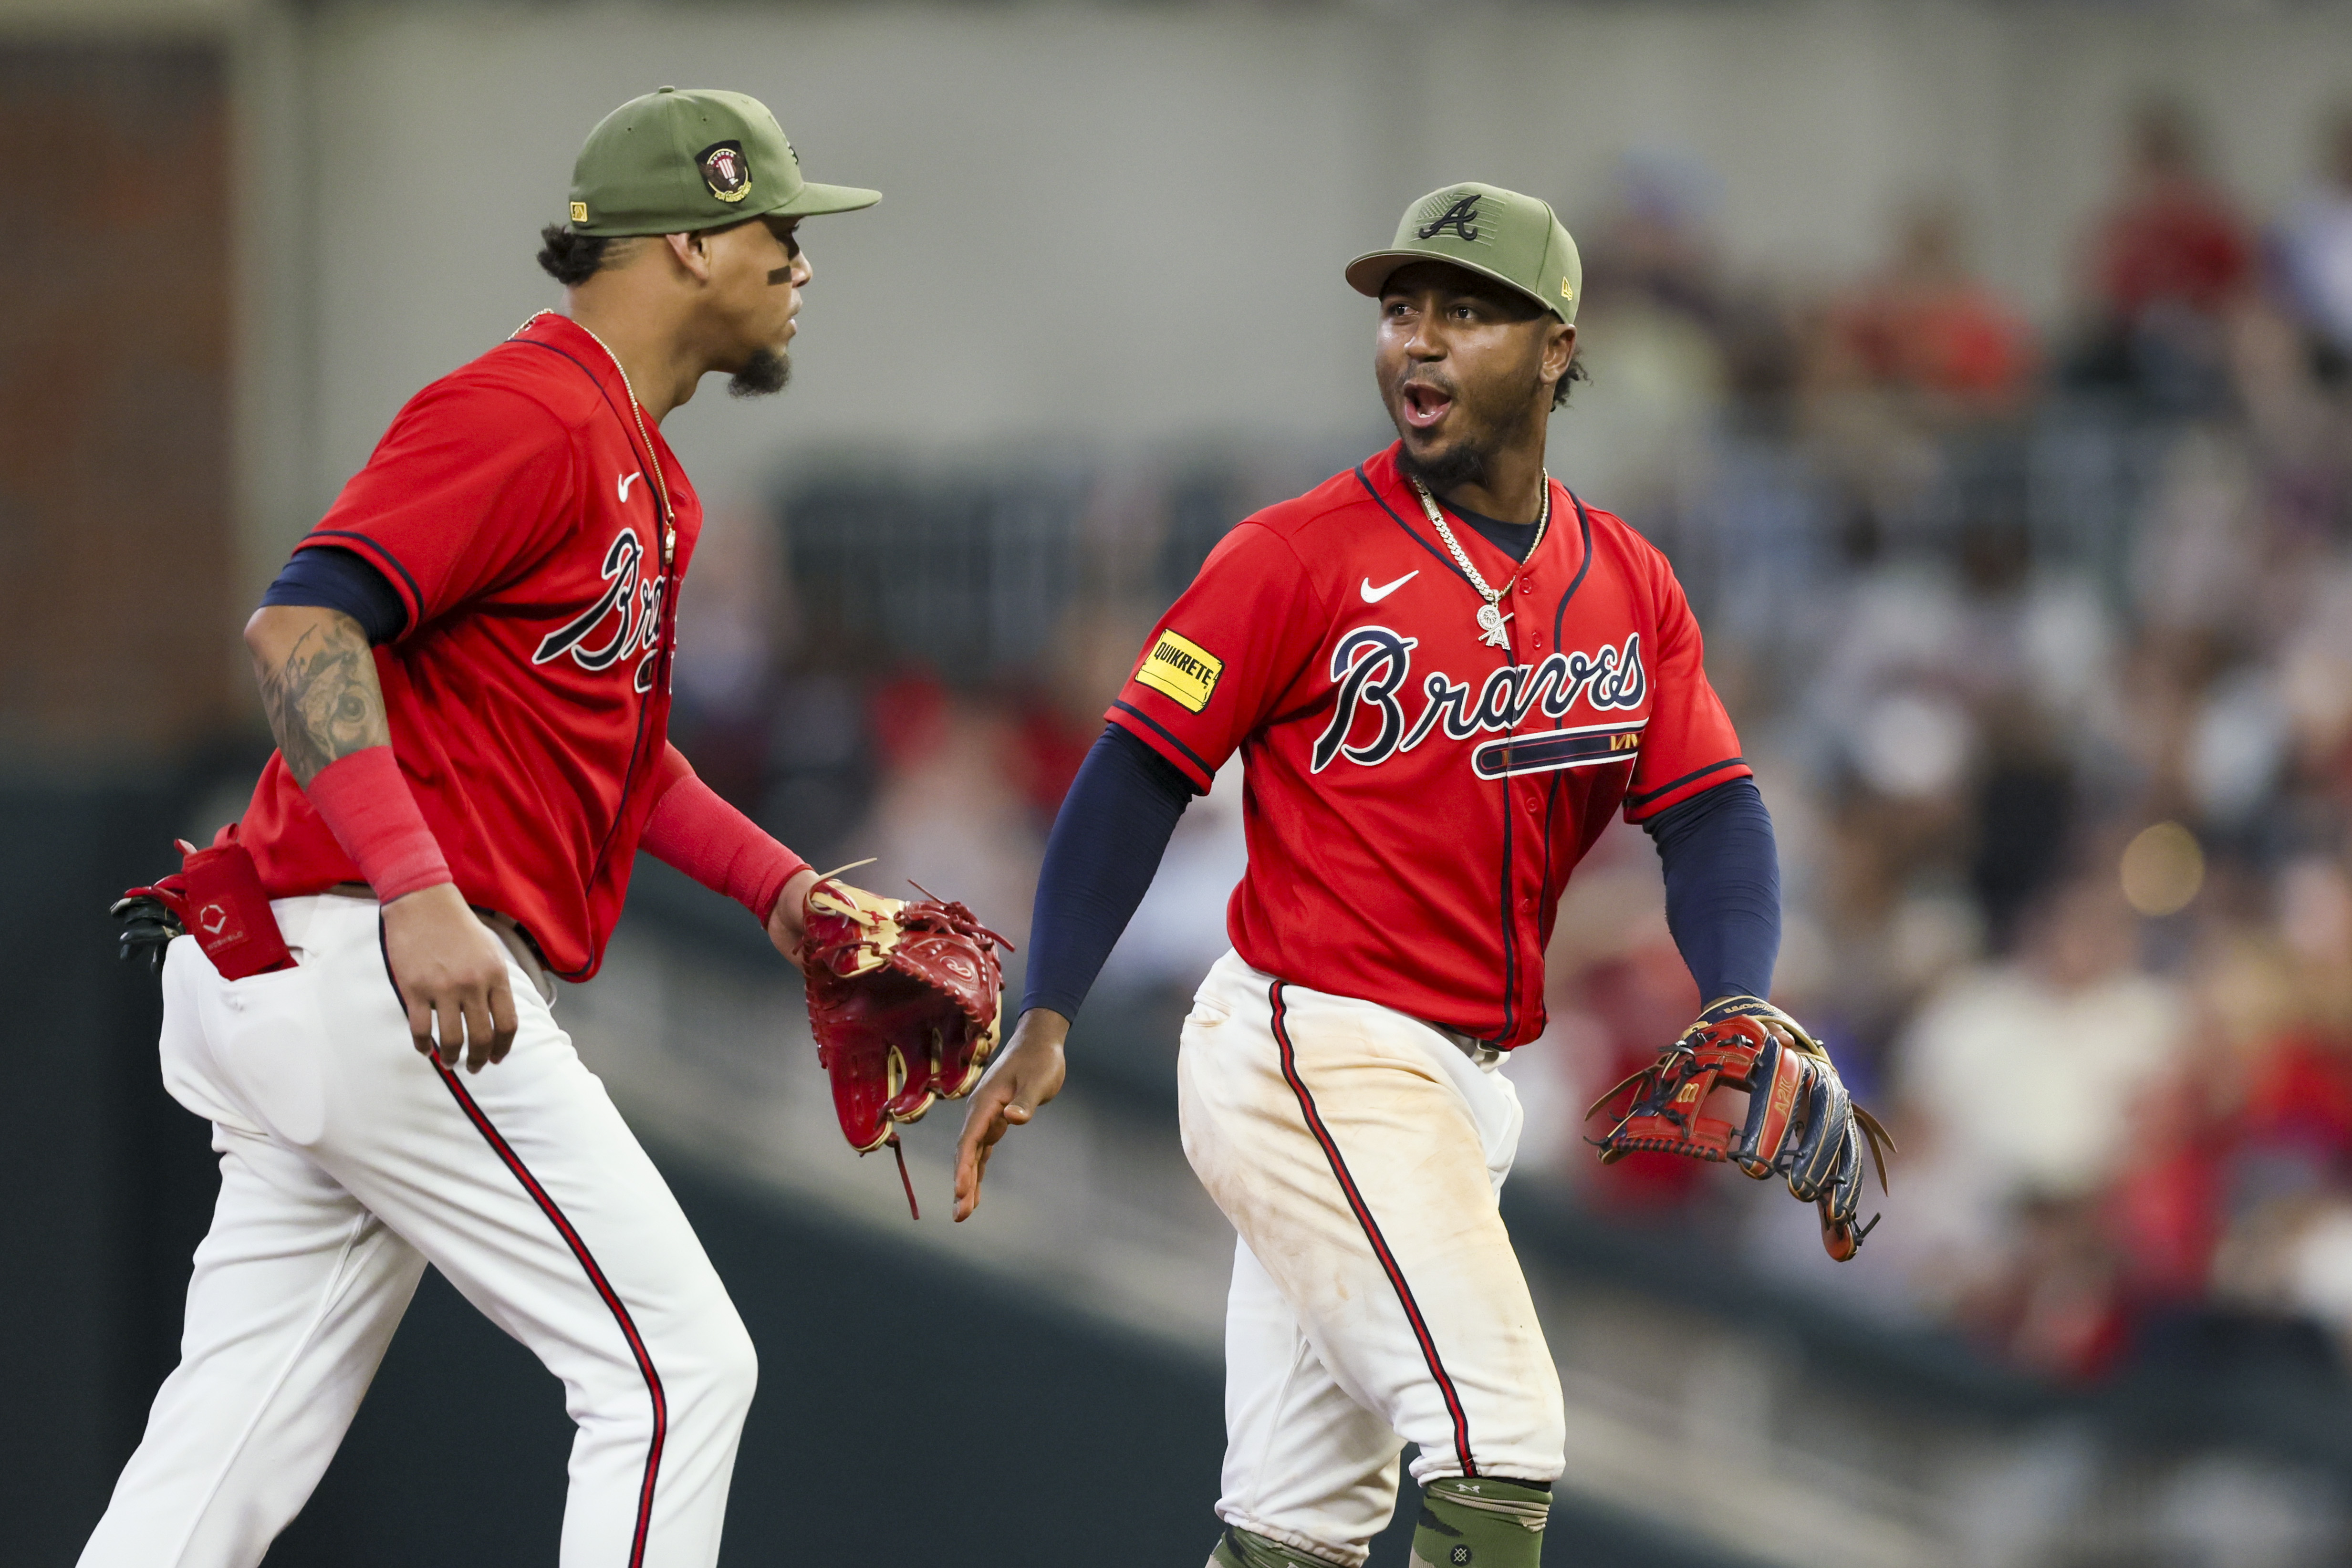 Photos: Braves pull away from the Mariners